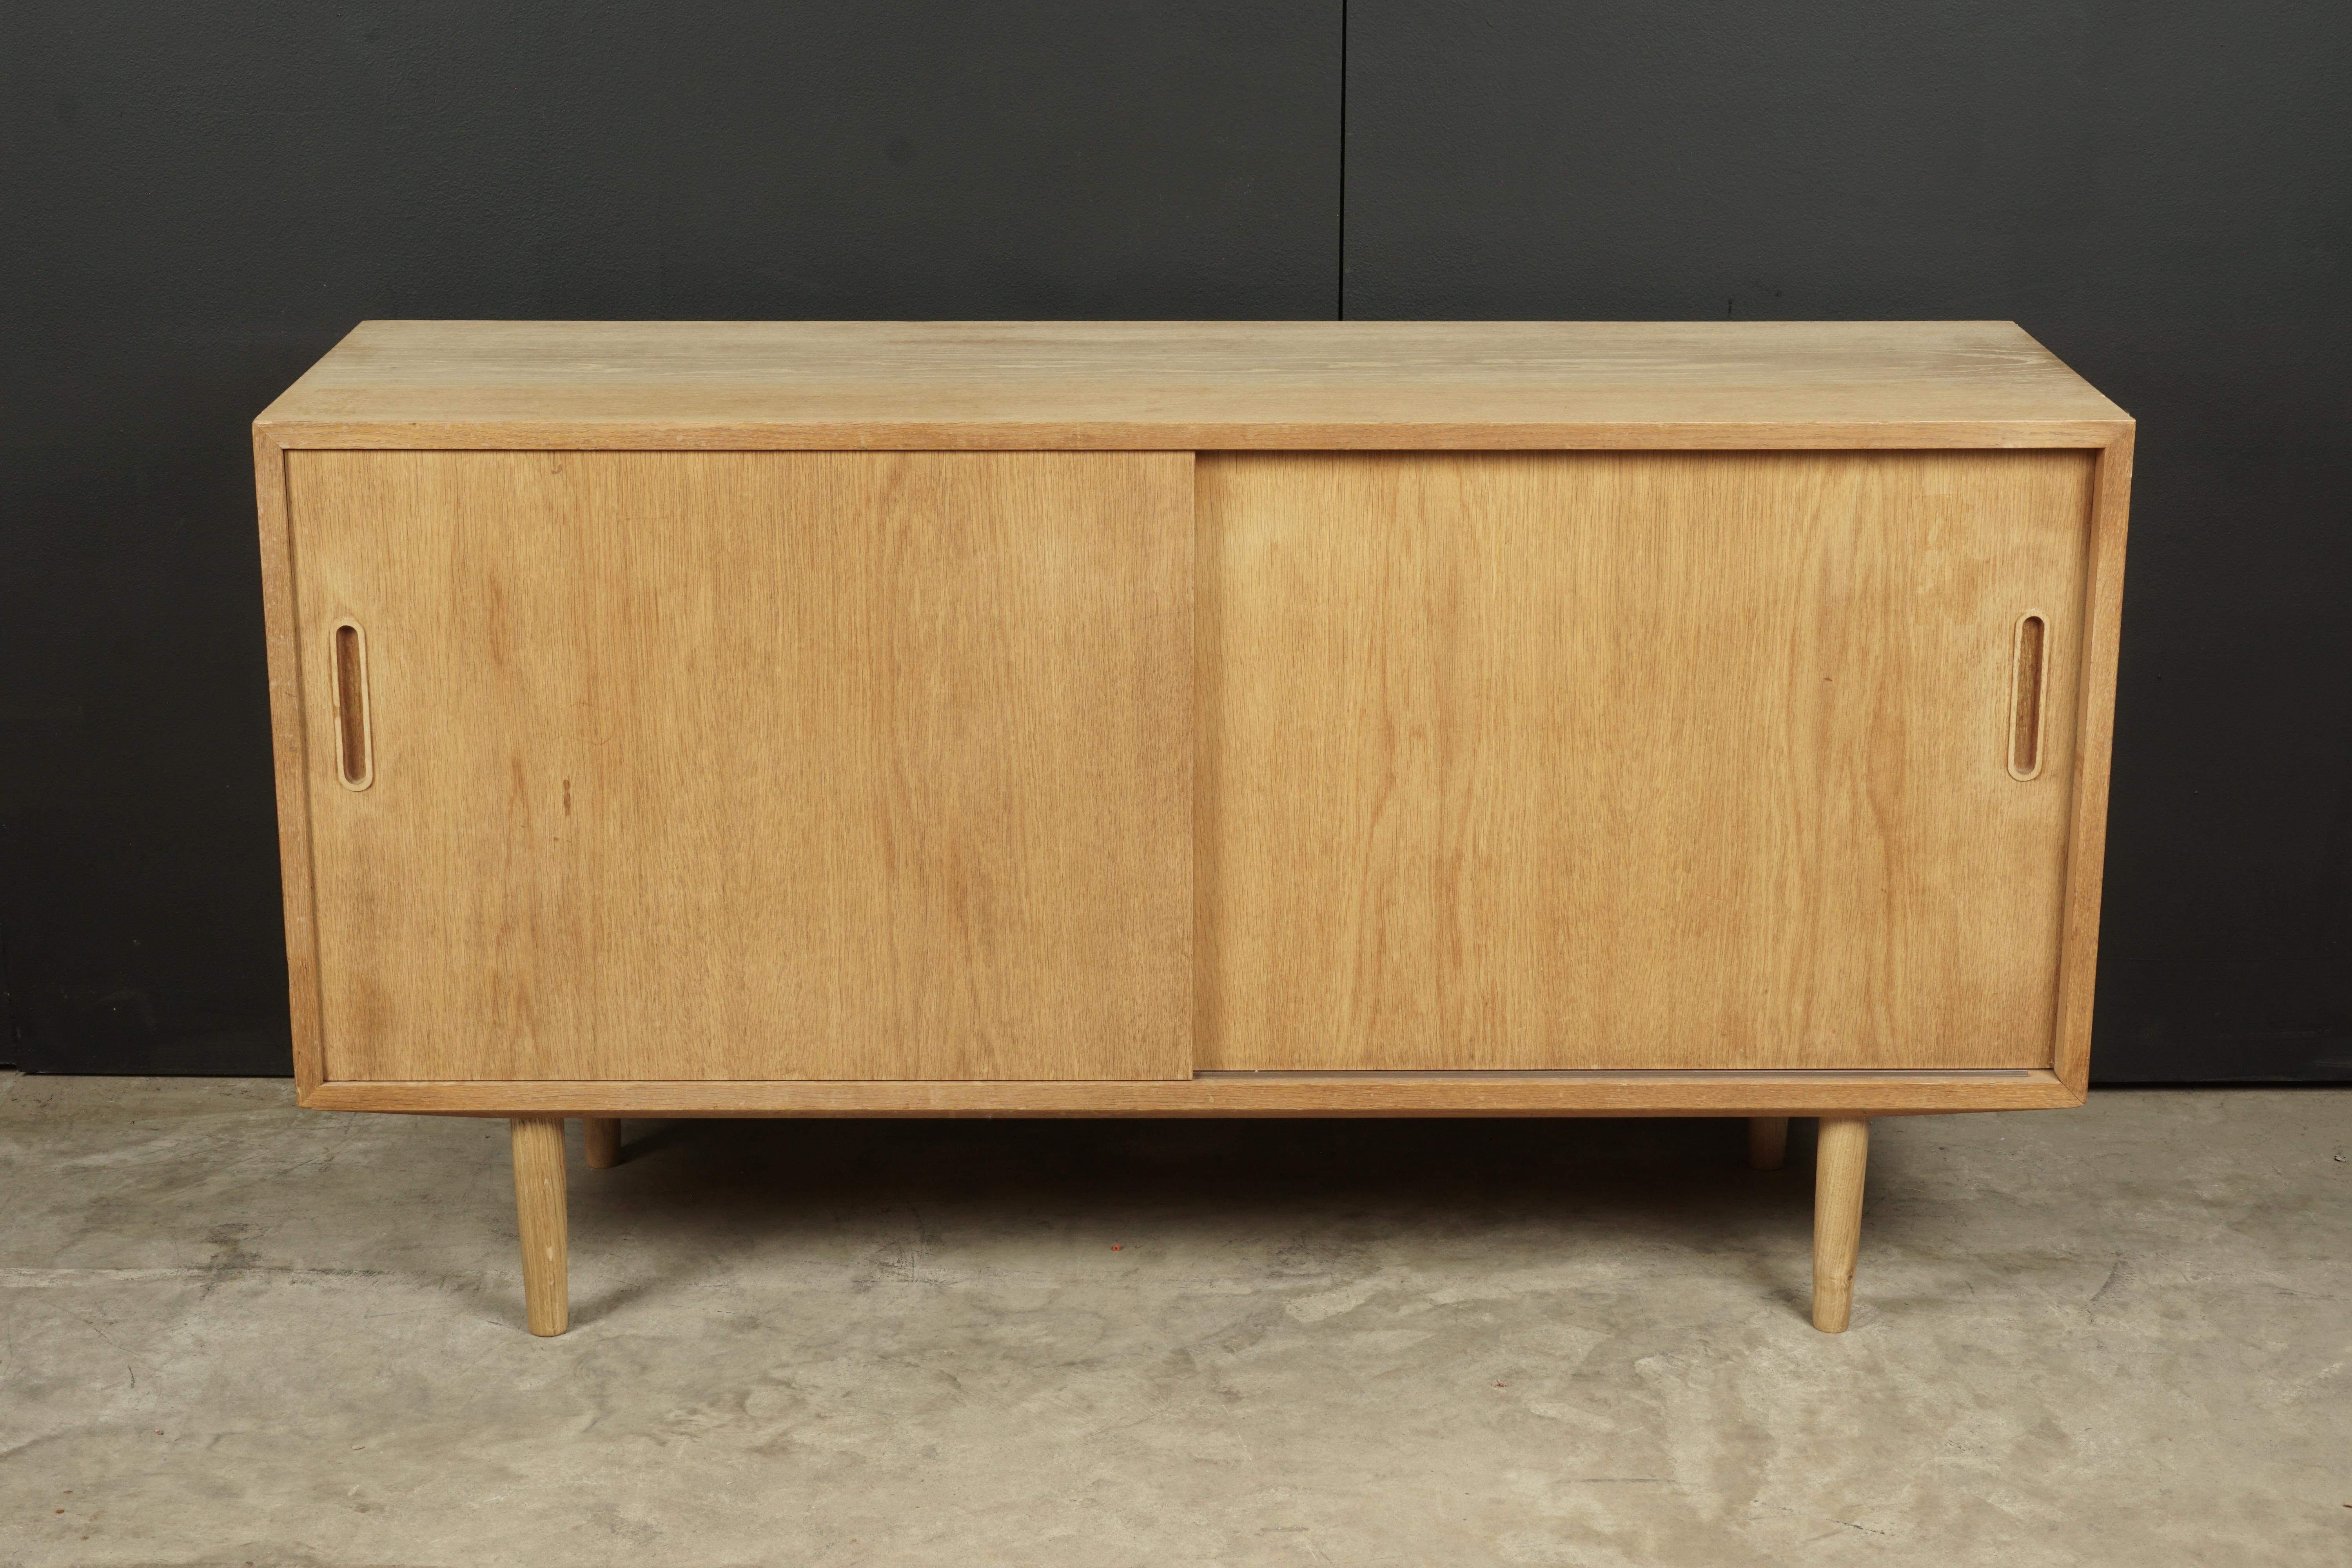 Midcentury oak credenza from Denmark, circa 1960. Two sliding doors with drawers and adjustable shelves. Danish control stamp on the reverse.